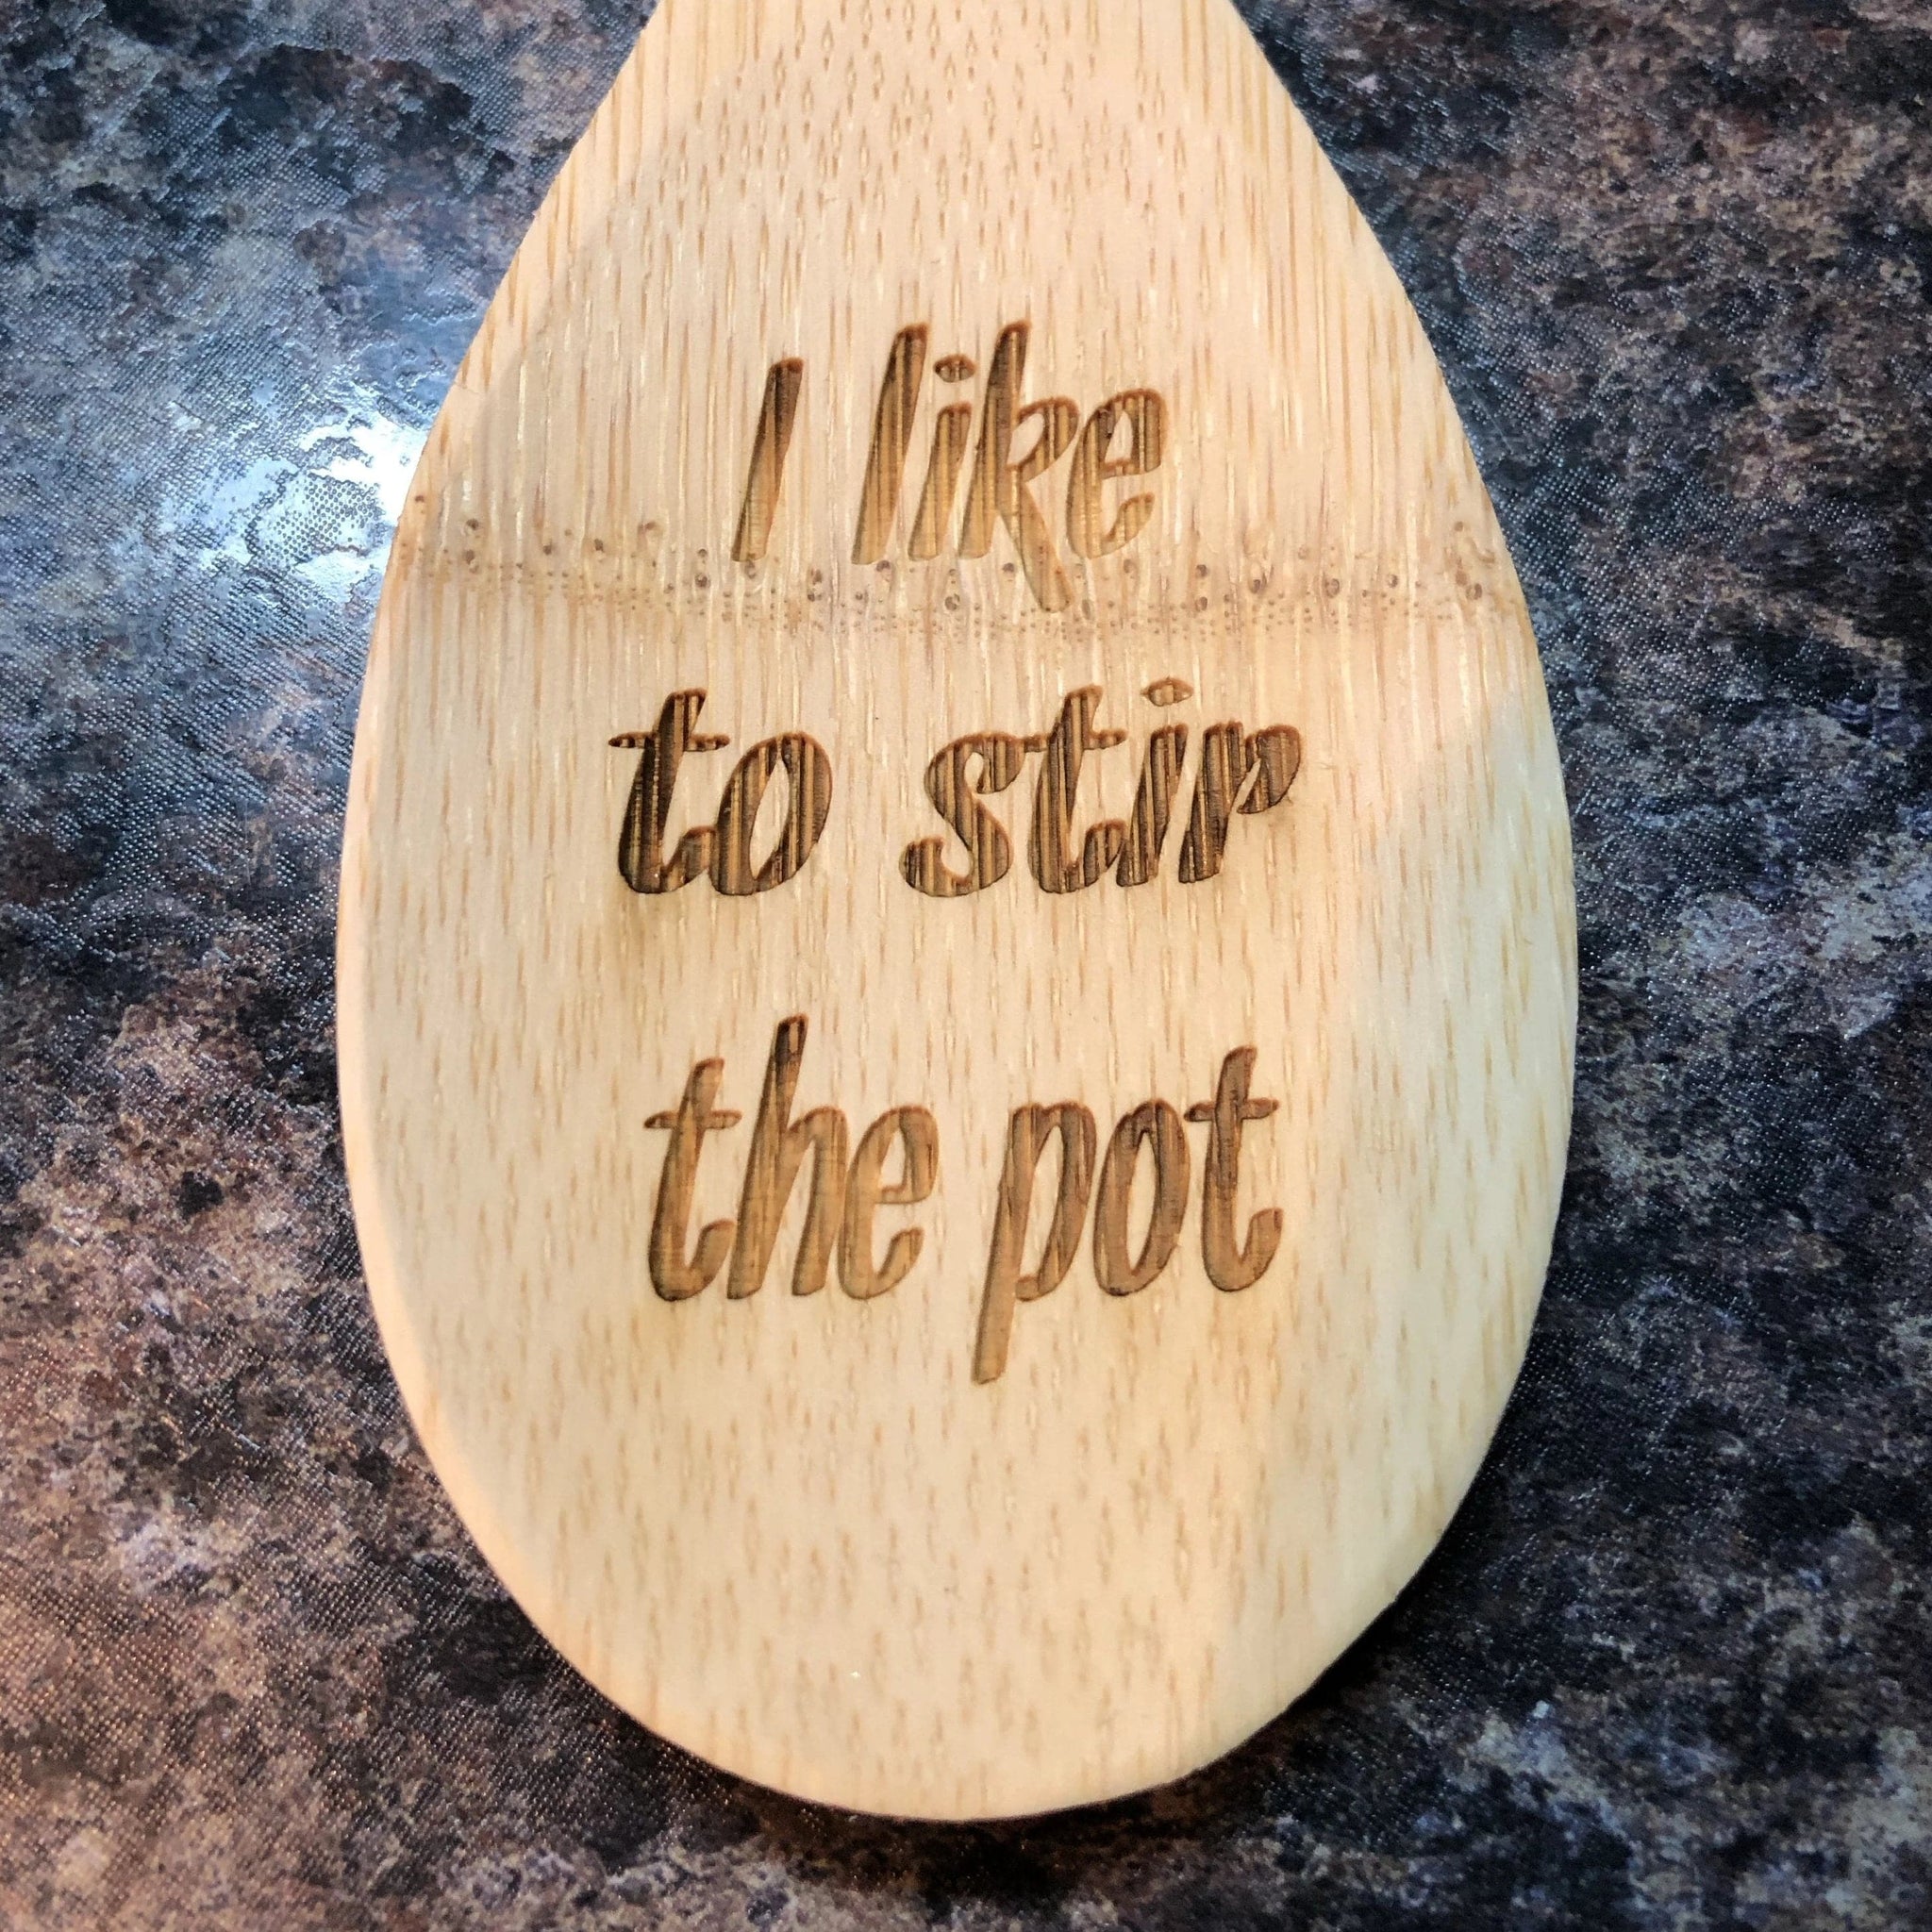 Wooden Engraved Spoon I Like To Stir The Pot. - C & A Engraving and Gifts